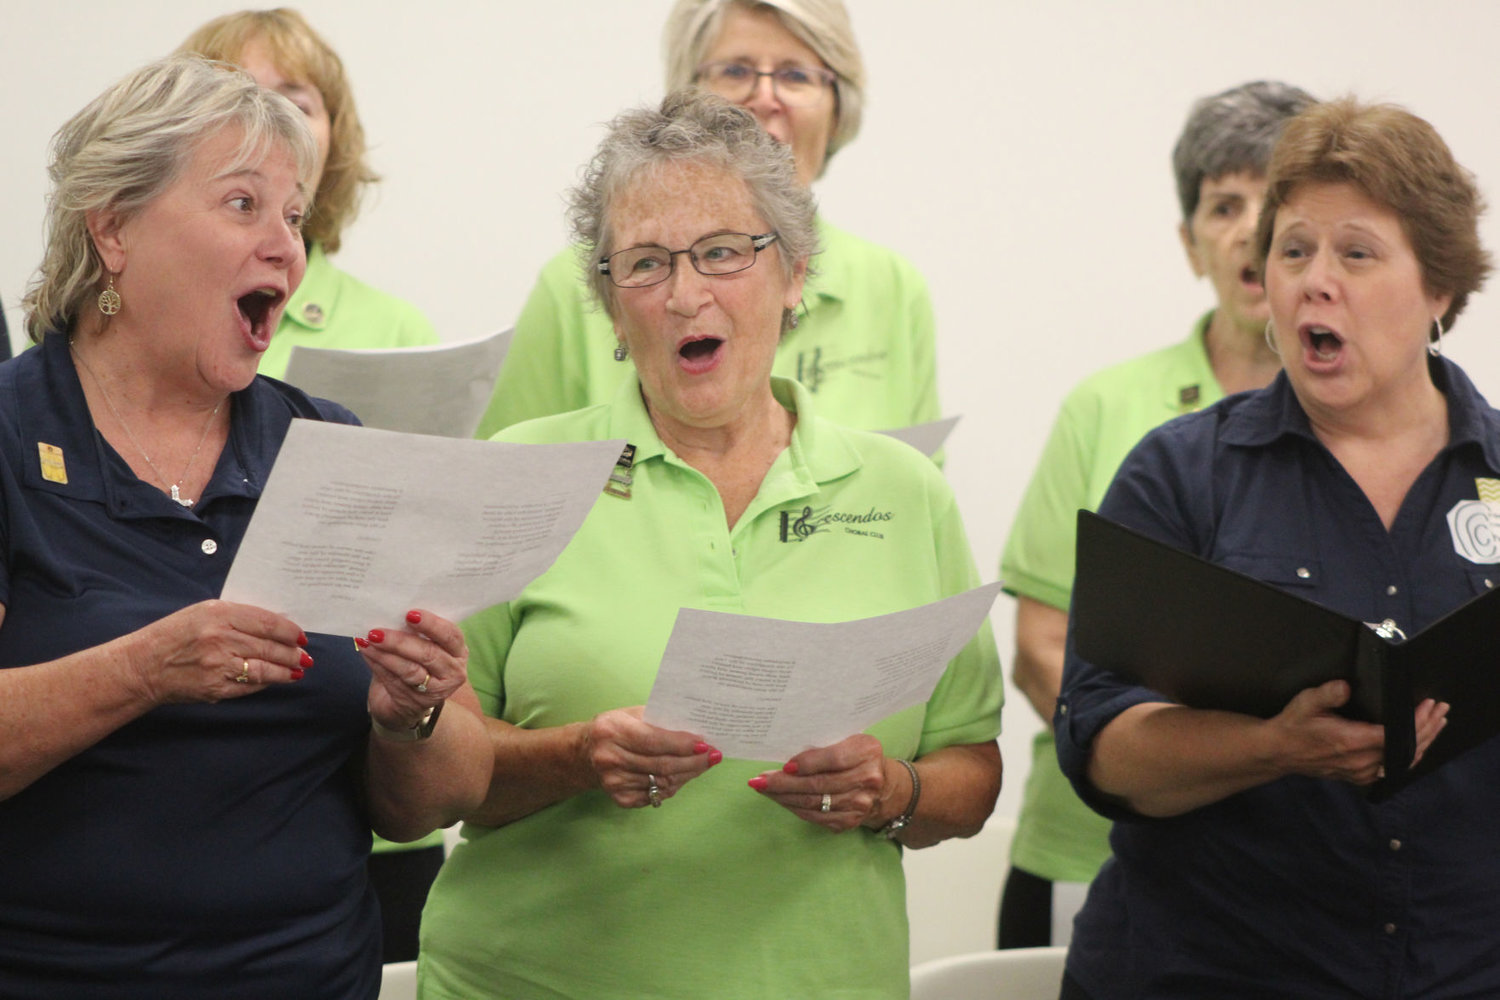 Members of the Crescendos perform at the kickoff celebration for the women's suffrage centennial Monday at the Crawfordsville District Public Library.